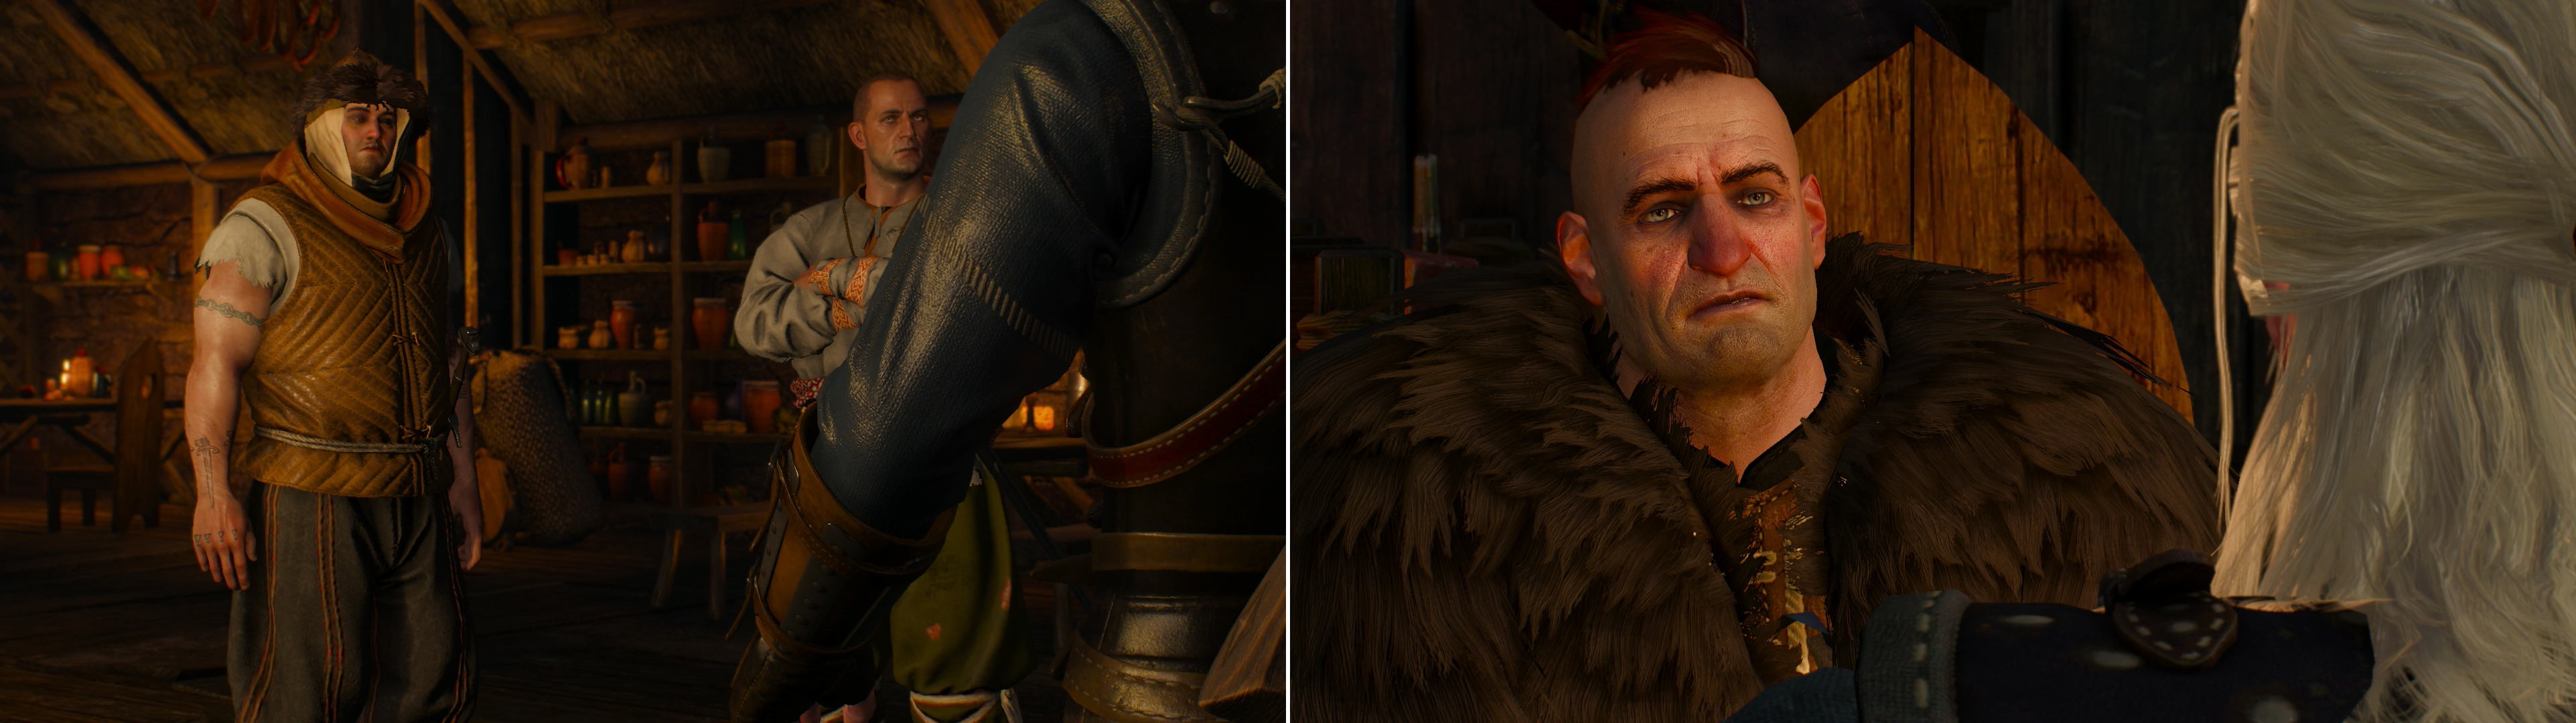 Not all Skelligers are friendly… well, most aren’t, really, but some are even more unfriendly than others (left). A voice of reason in the form of a Skelliger named Jorund can be found, however (right).